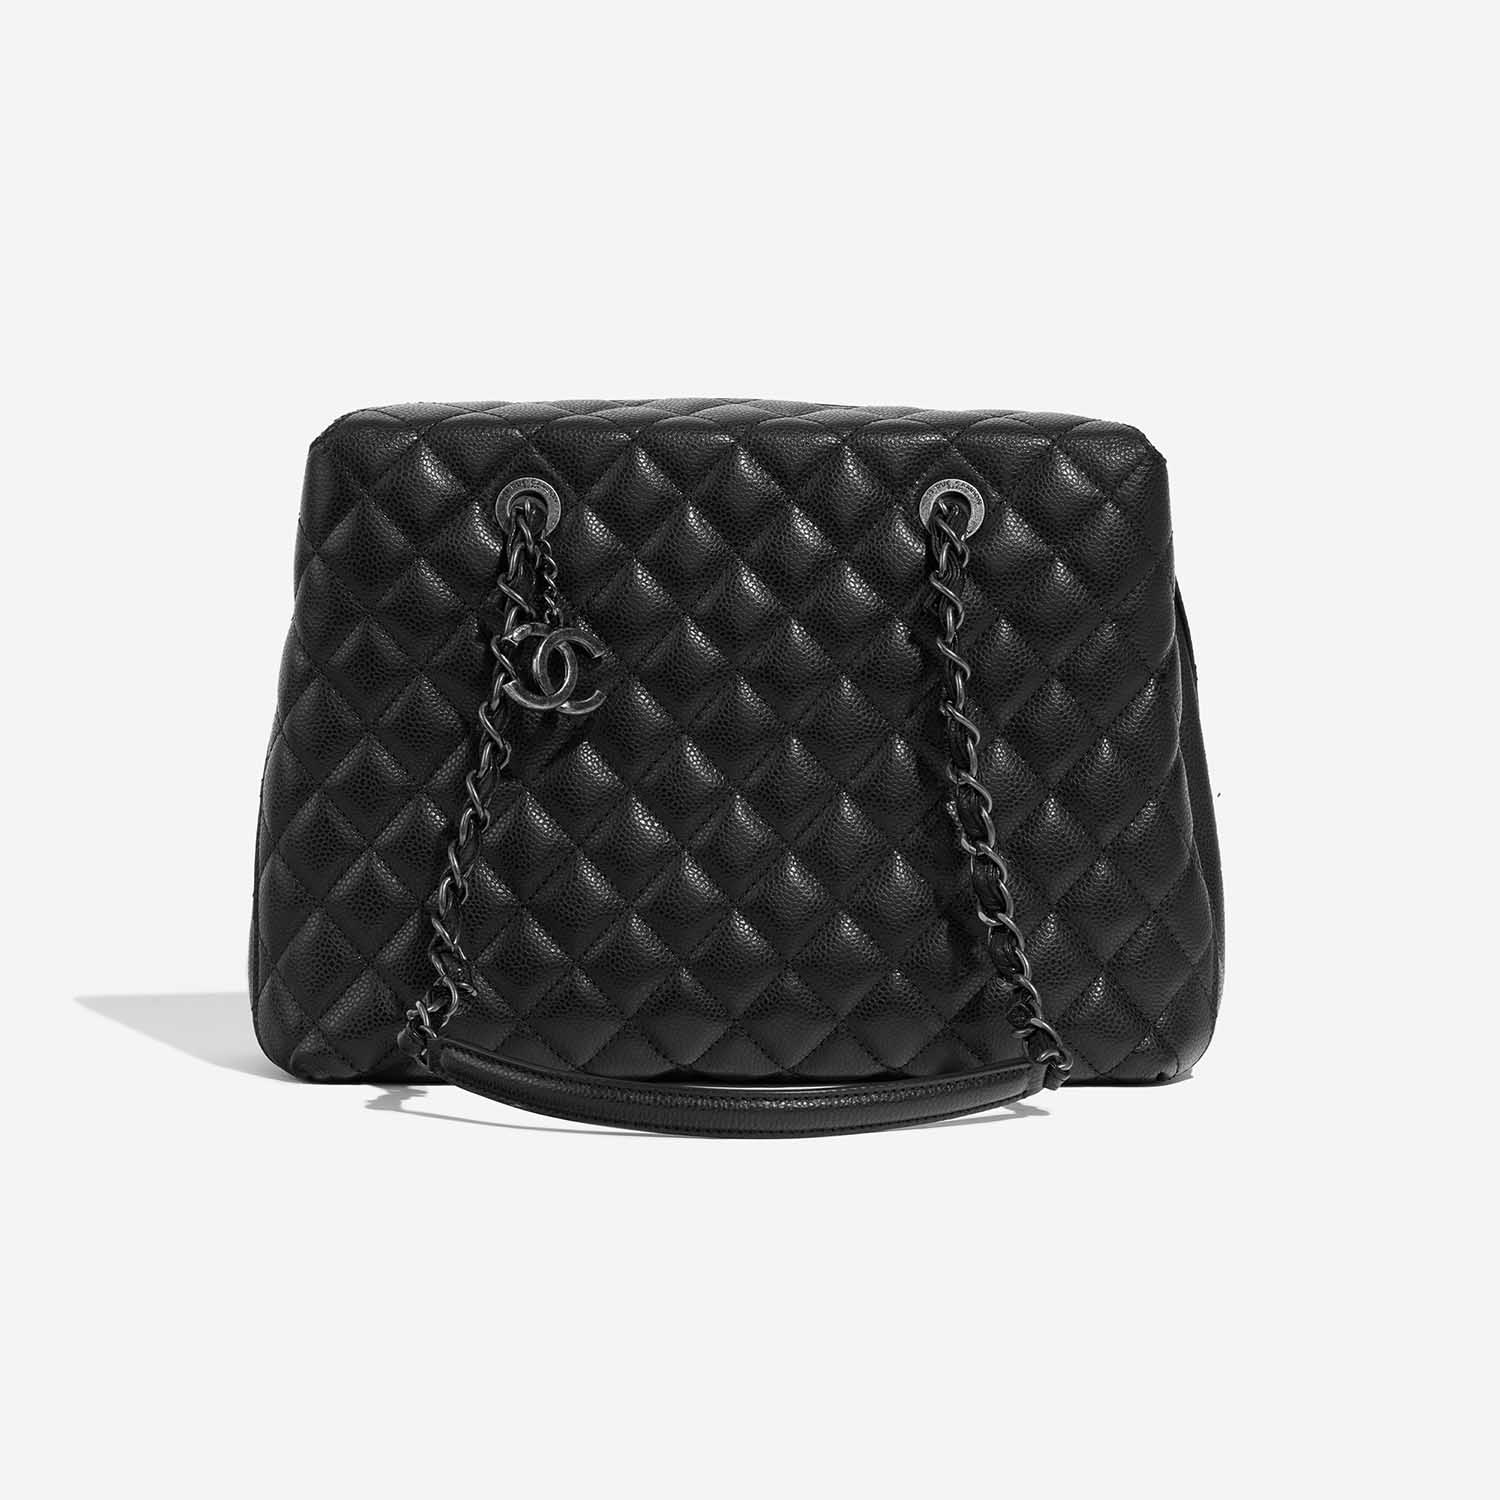 Chanel Pre-owned Women's Leather Tote Bag - Black - One Size